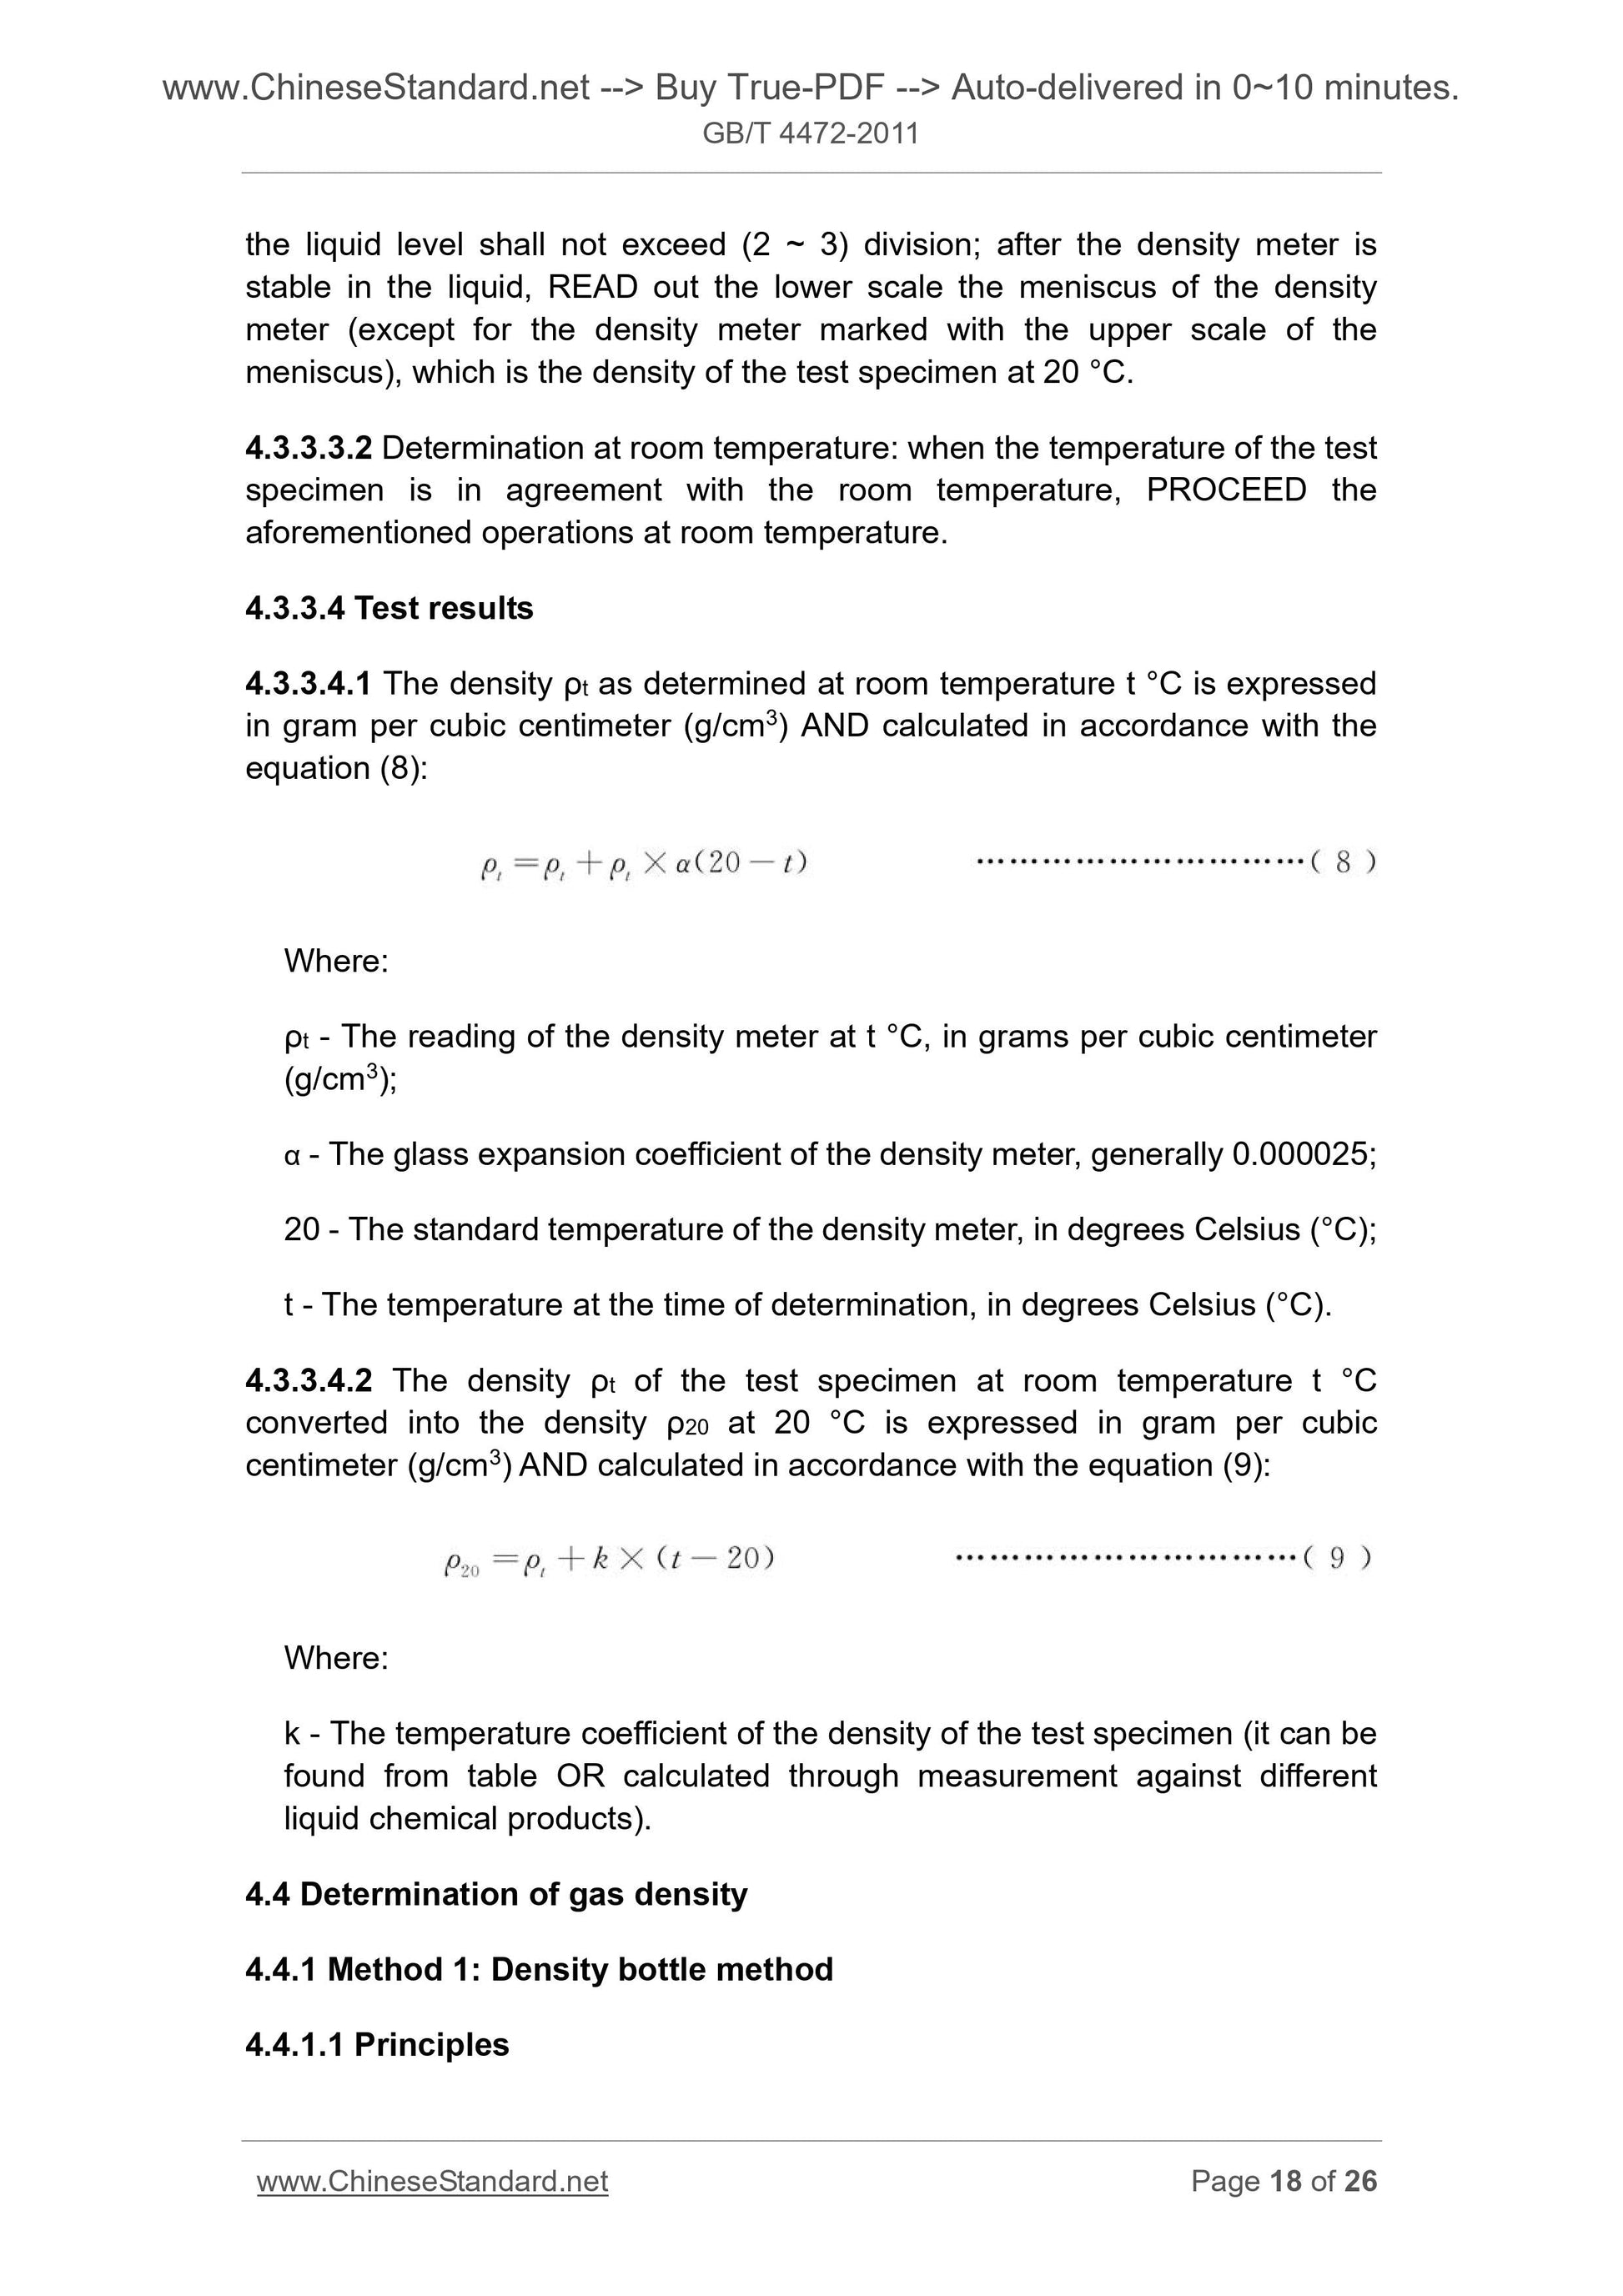 GB/T 4472-2011 Page 10